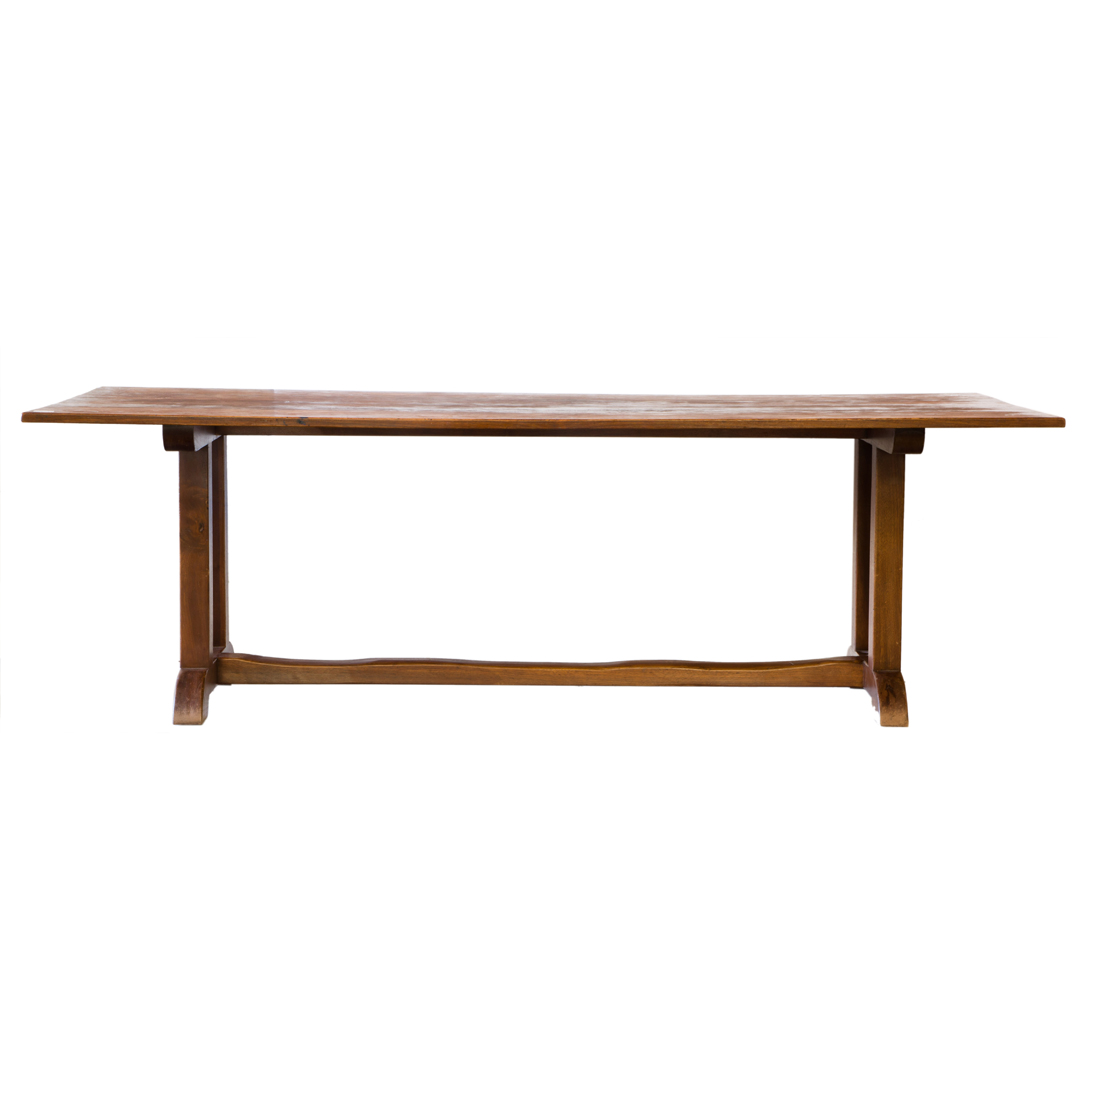 A CONTINENTAL REFECTORY TABLE A 3a2b9f